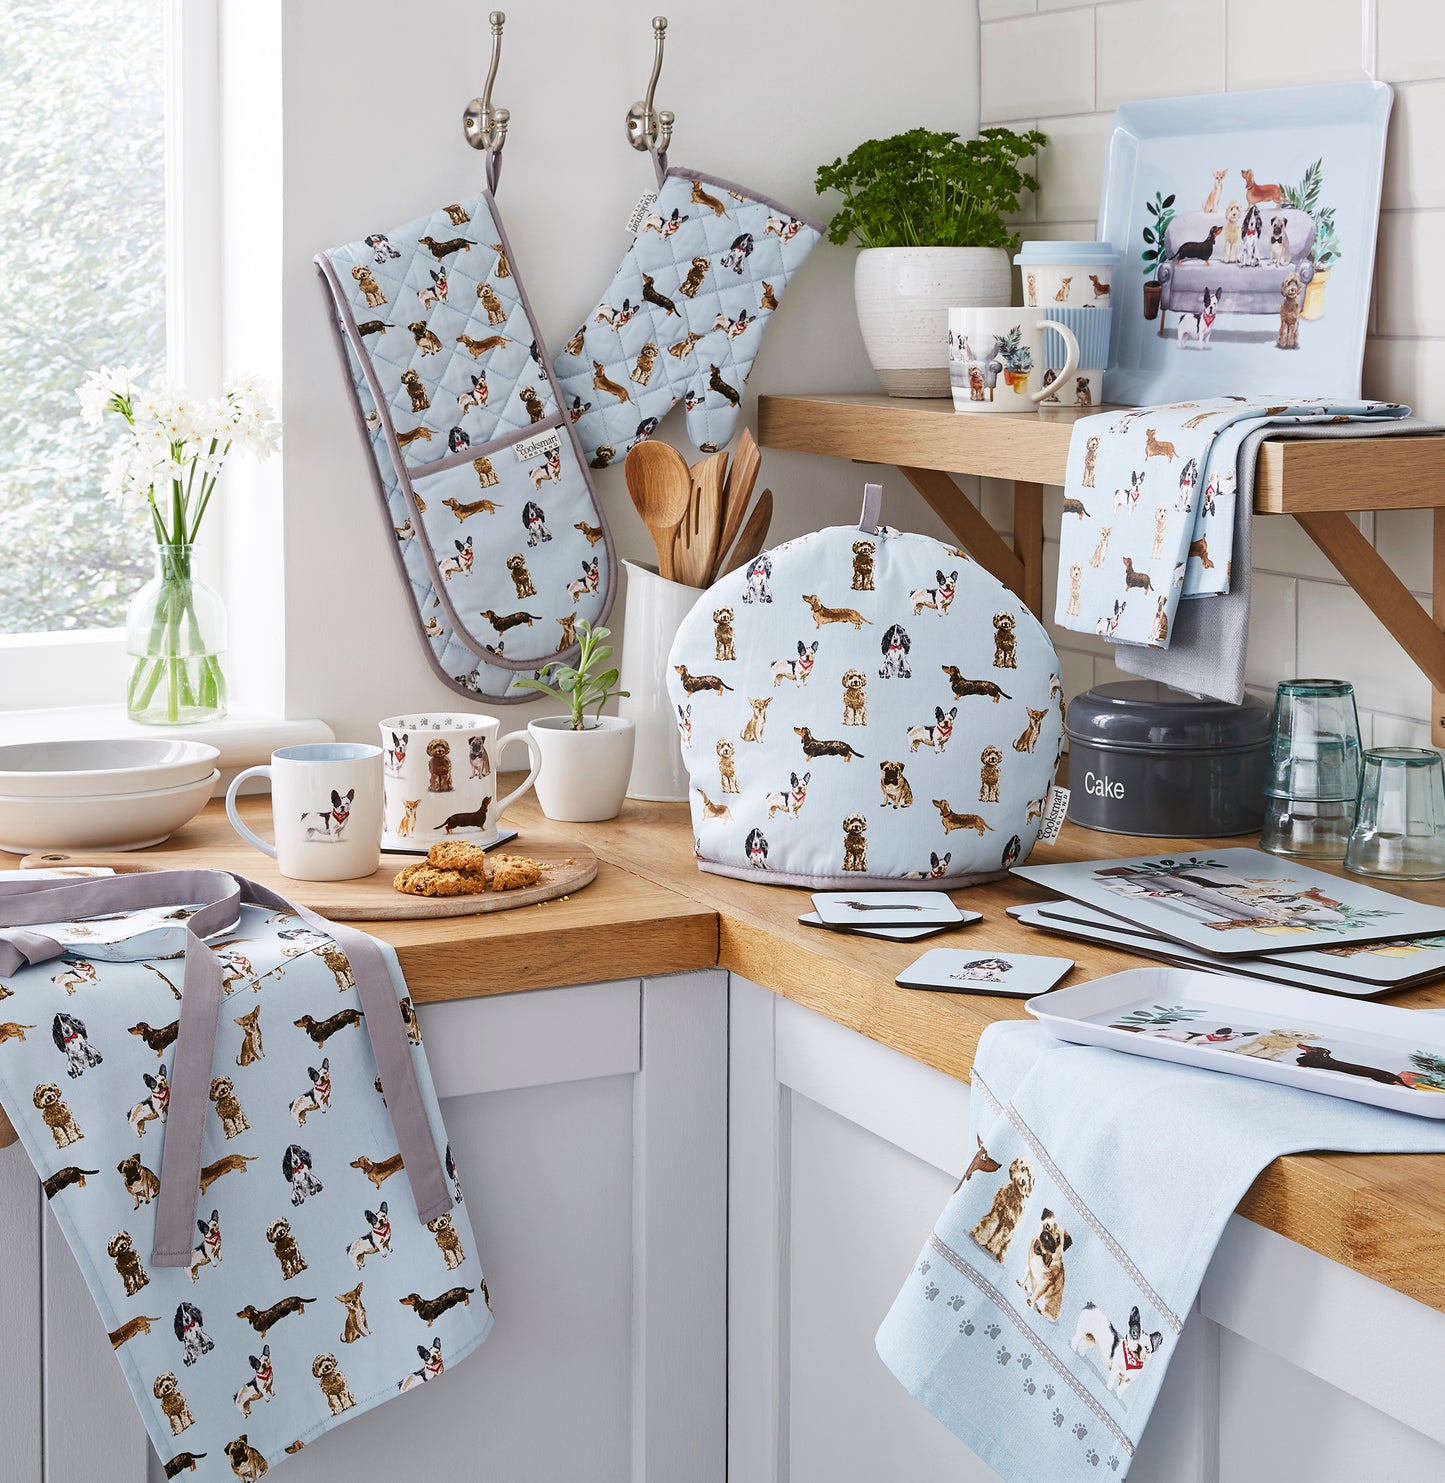 Cotton Apron from the coordinating range of kitchenware and textiles from cooksmart.